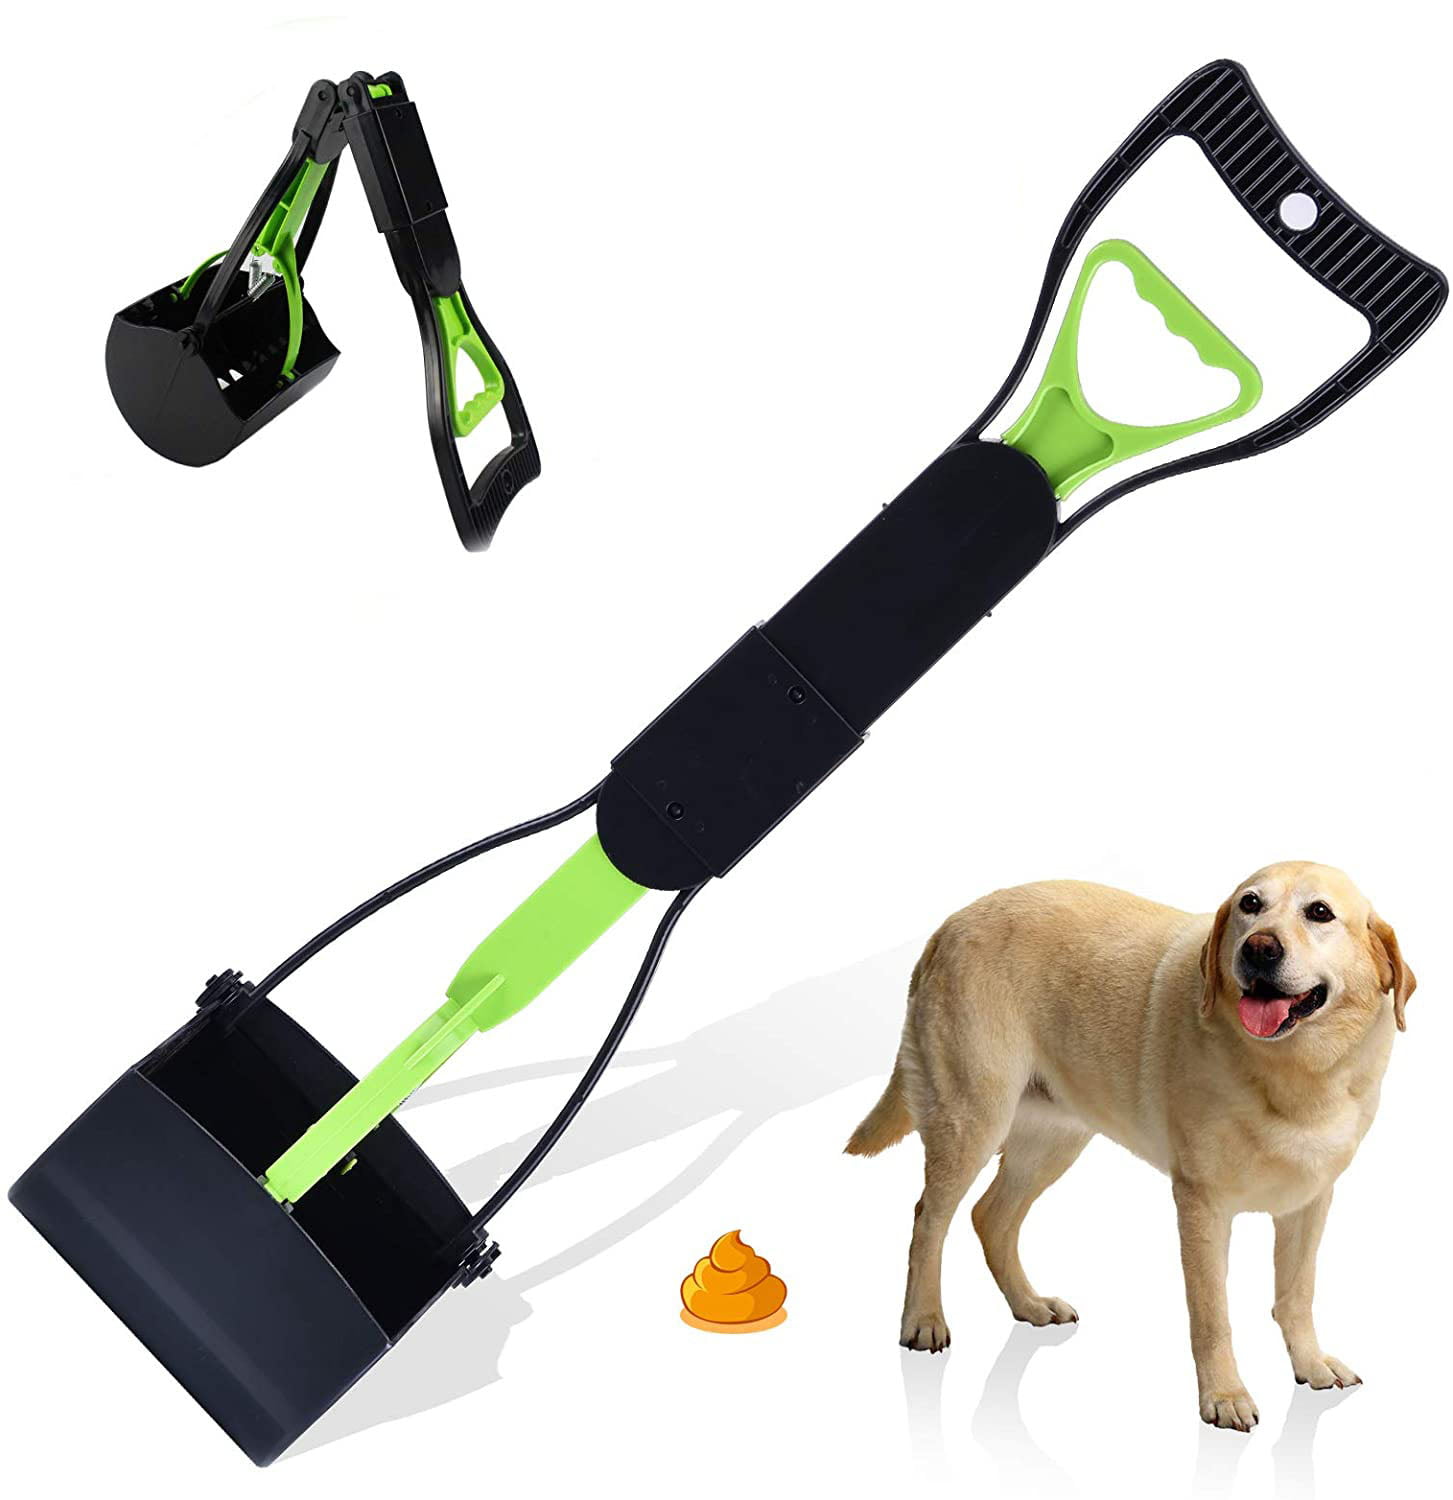 Purple TIMINGILA 28 Long Handle Pet Pooper Scooper for Dogs and Cats with High Strength Material and Durable Spring Easy to Use for Grass Gravel Pick Up Dirt 